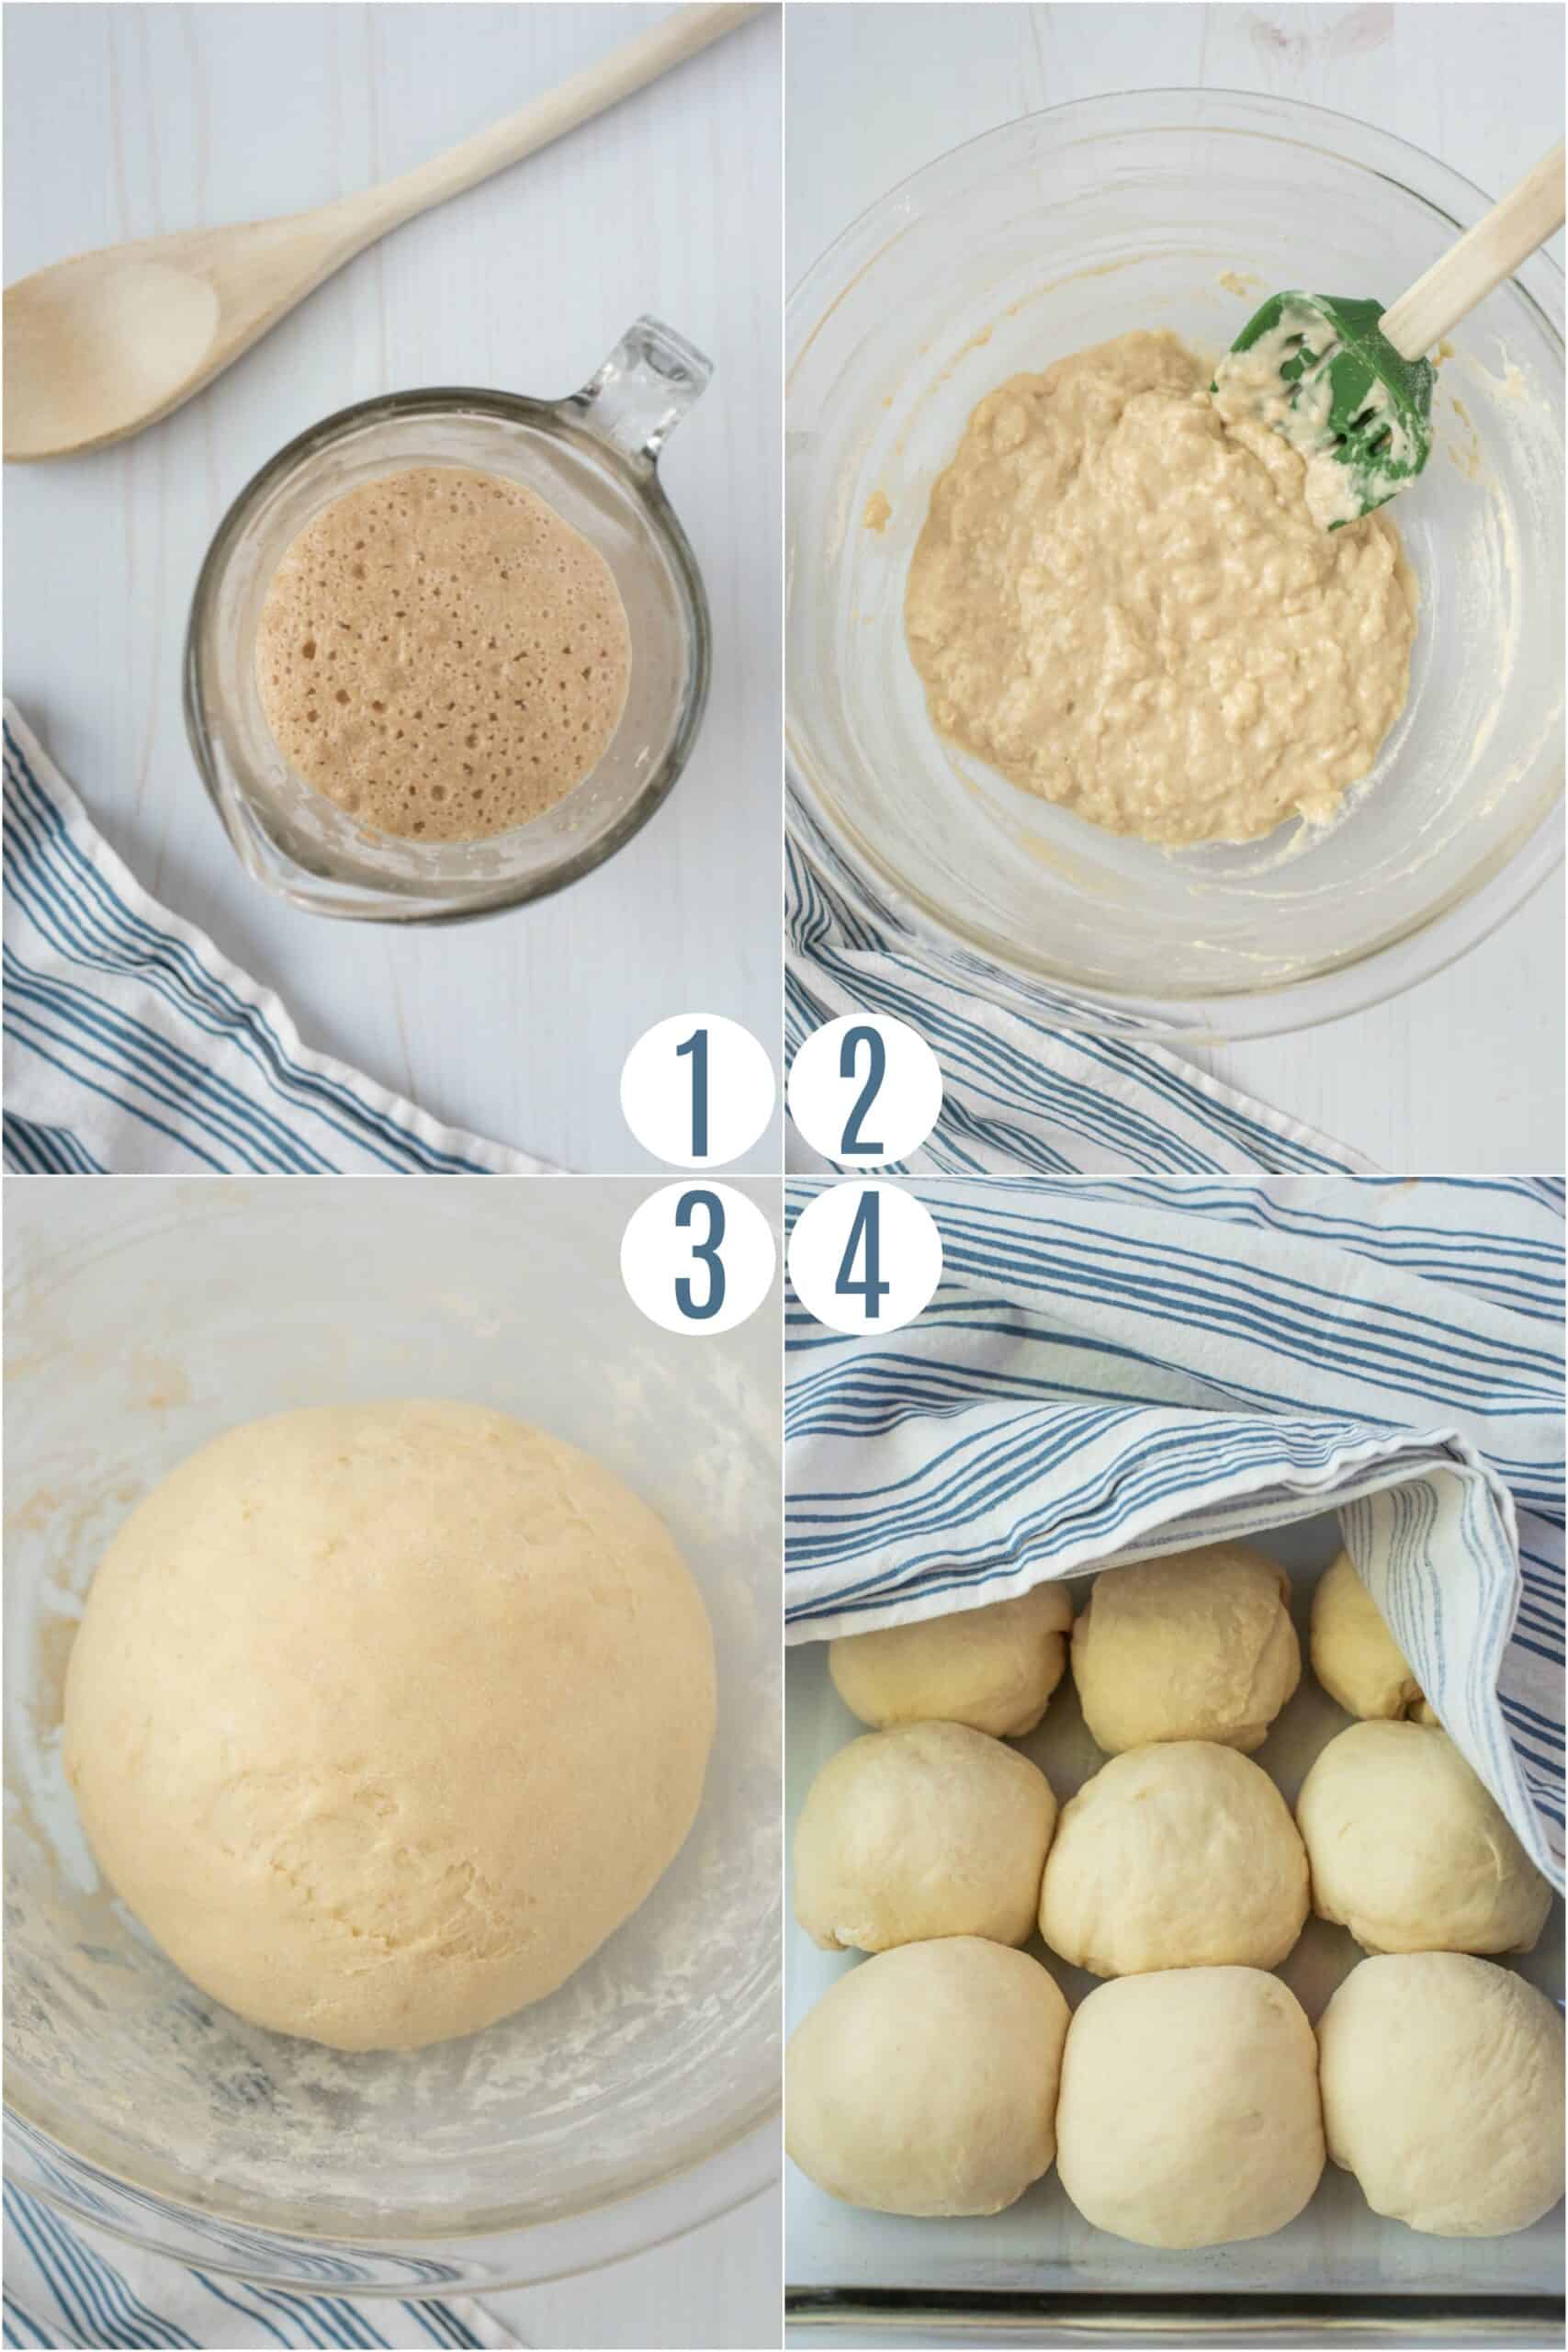 Step by step photos showing how to make dinner rolls.